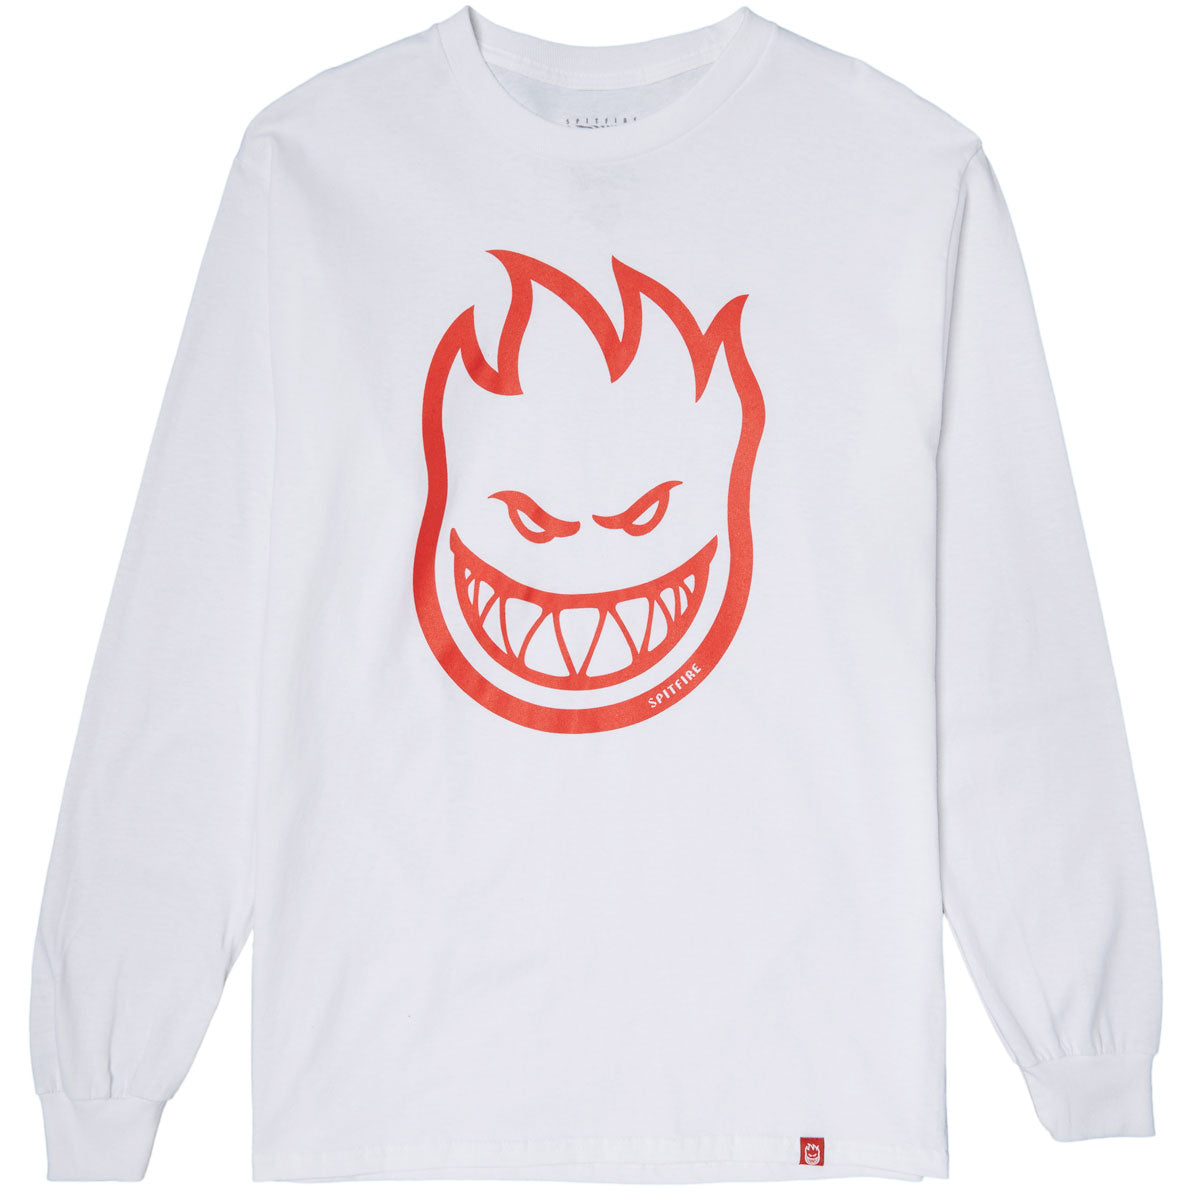 Spitfire Bighead Long Sleeve T-Shirt - White/Red image 1